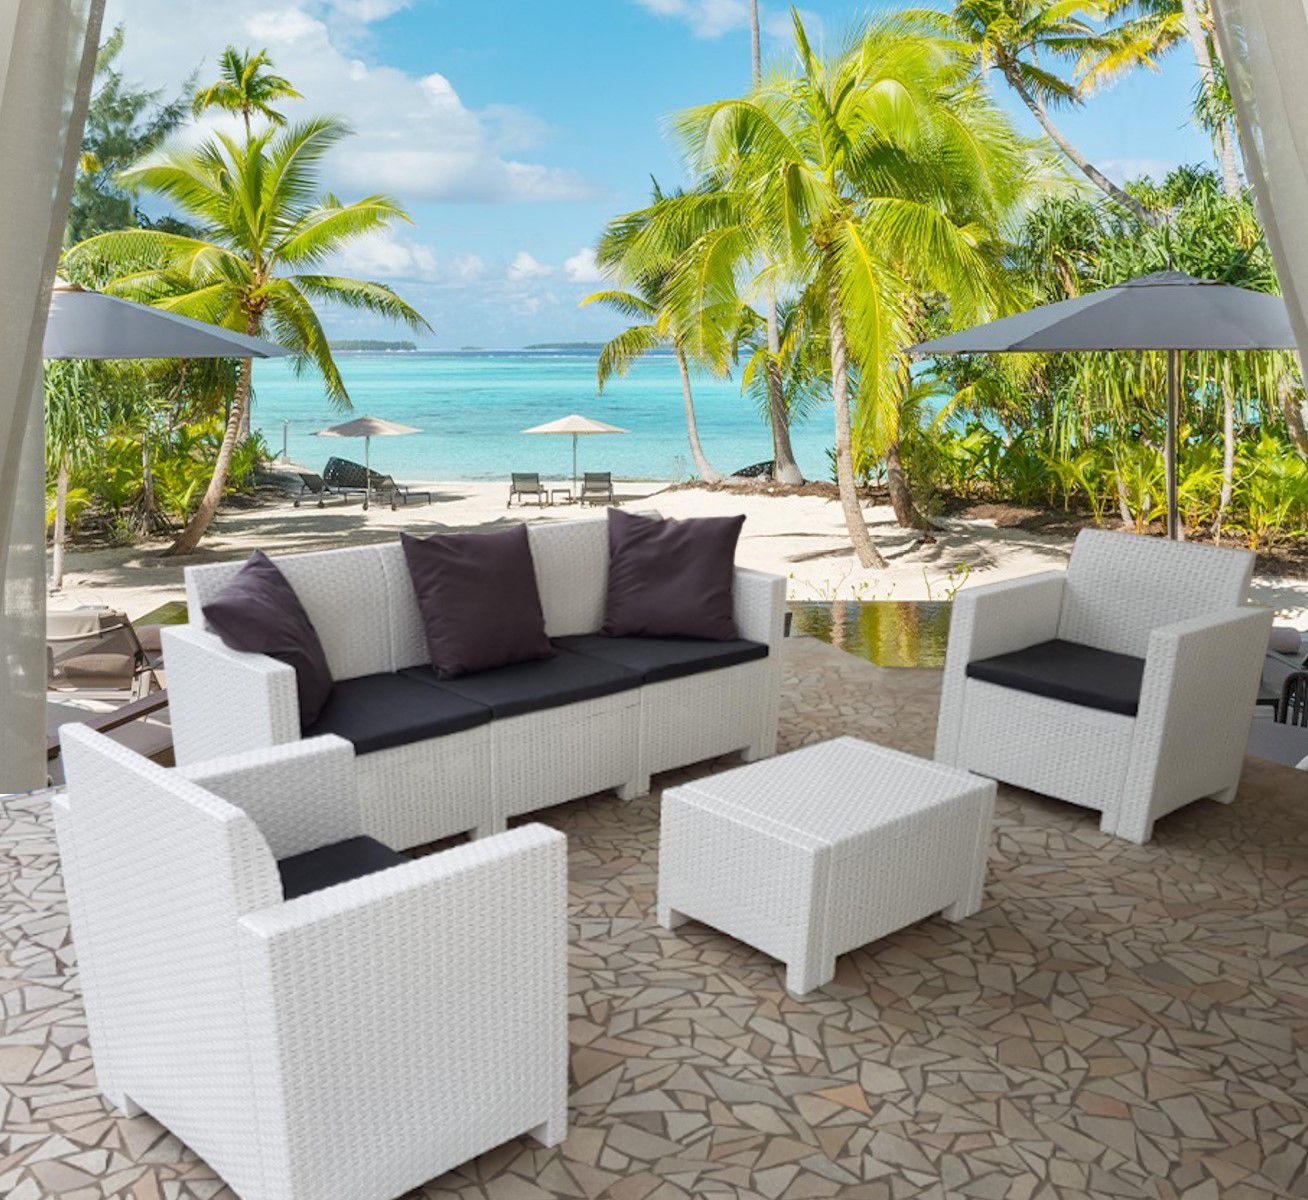 Italian Outdoor furniture, Patio Dining Sets & Outdoor Conversation Sets available in 3 colors